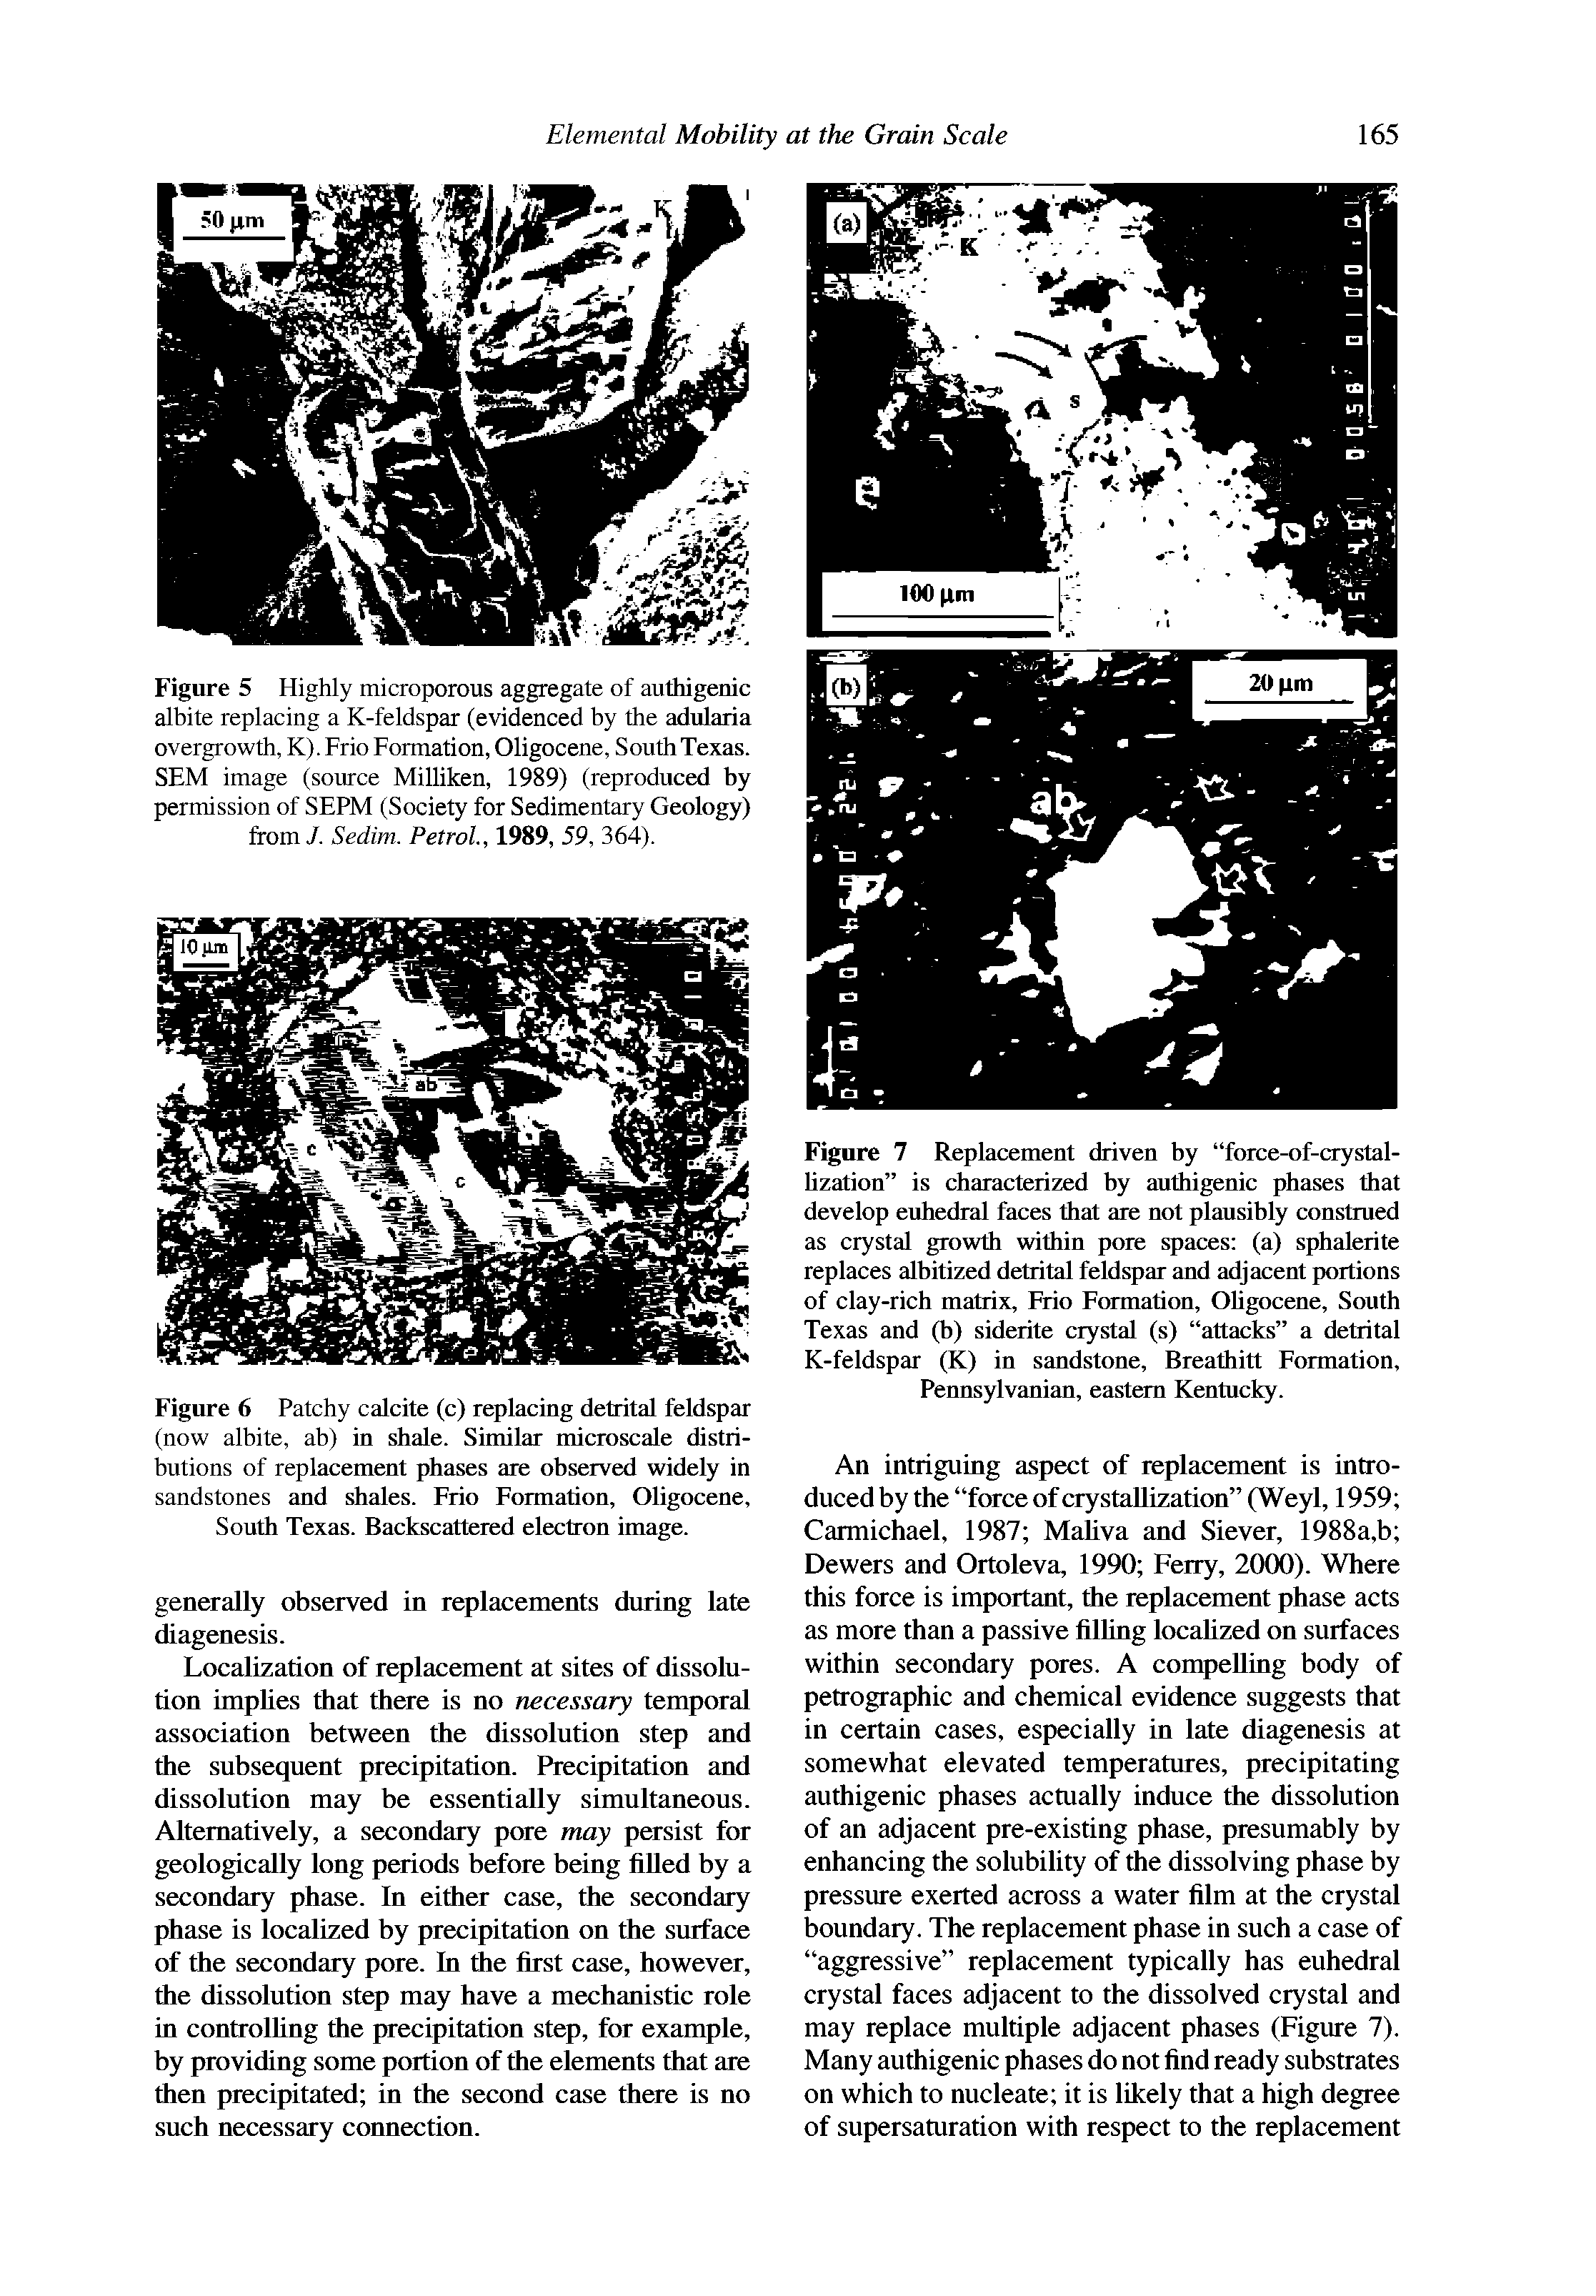 Figure 7 Replacement driven by force-of-crystal-Uzation is characterized by authigenic phases that develop euhedral faces that are not plausibly constmed as crystal growth within pore spaces (a) sphalerite replaces albitized detrital feldspar and adjacent portions of clay-rich matrix, Frio Formation, Oligocene, South Texas and (b) siderite crystal (s) attacks a detrital K-feldspar (K) in sandstone, Breathitt Formation, Pennsylvanian, eastern Kentucky.